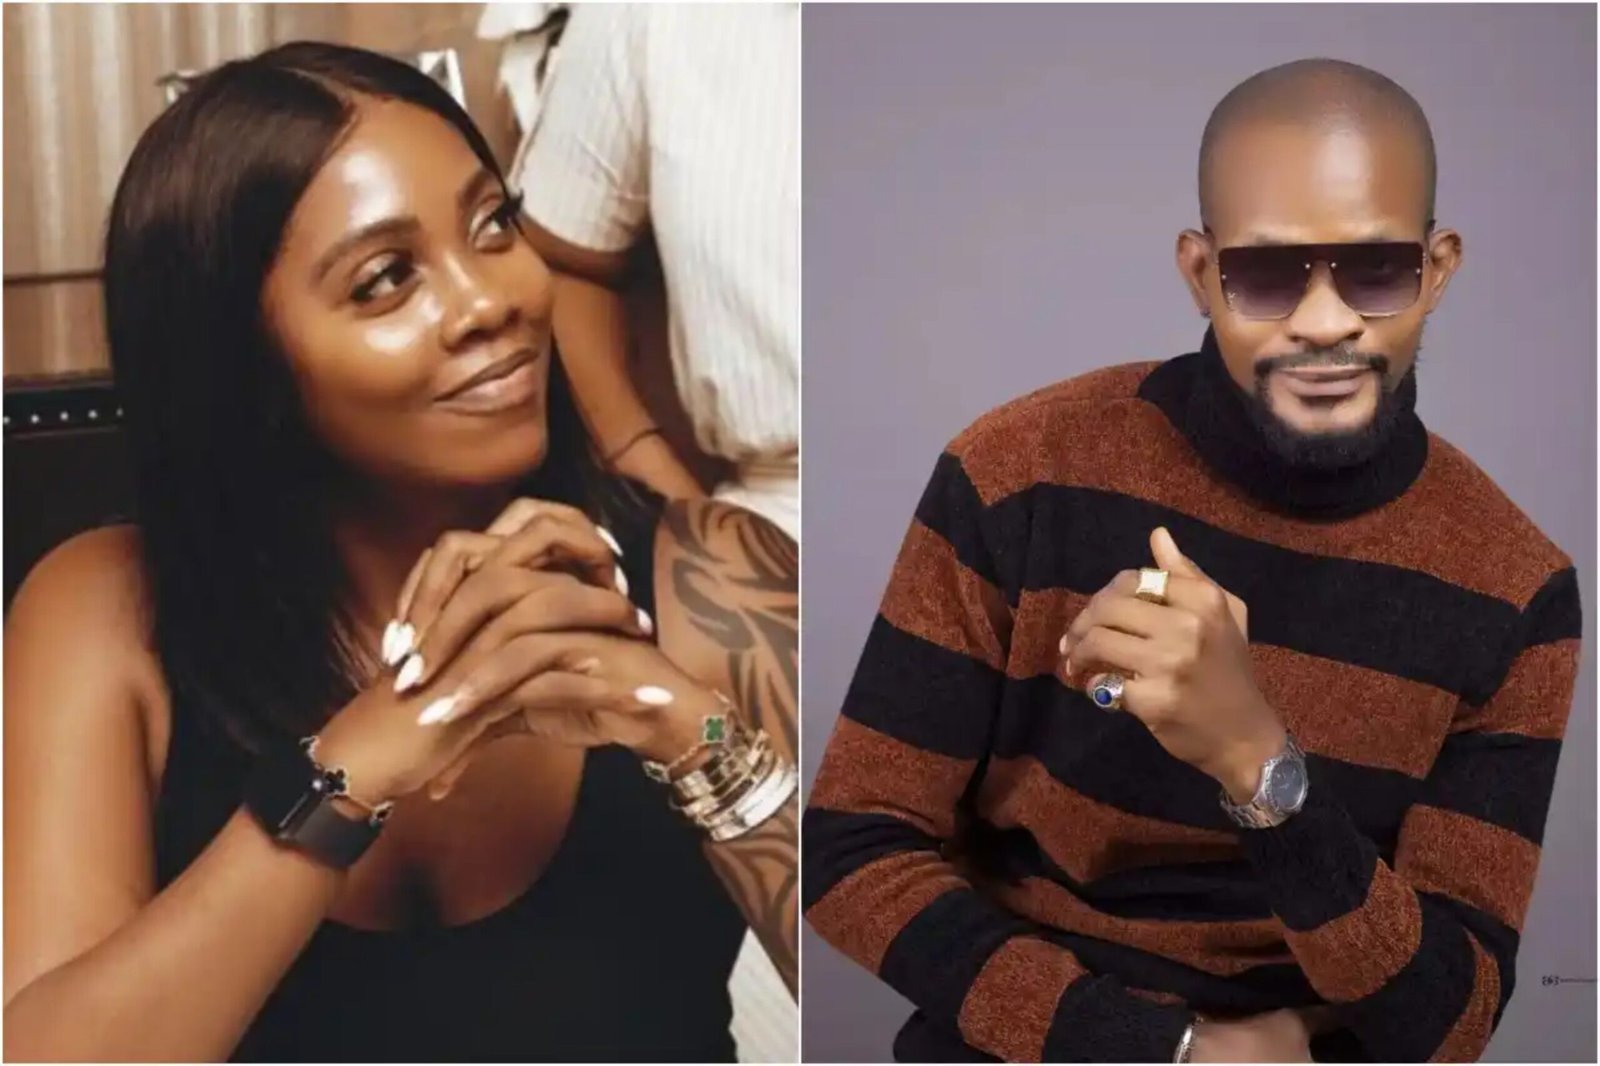 We never recover from your tape – Uche Maduagwu drags Tiwa Savage over her outfit to an event in Ghana